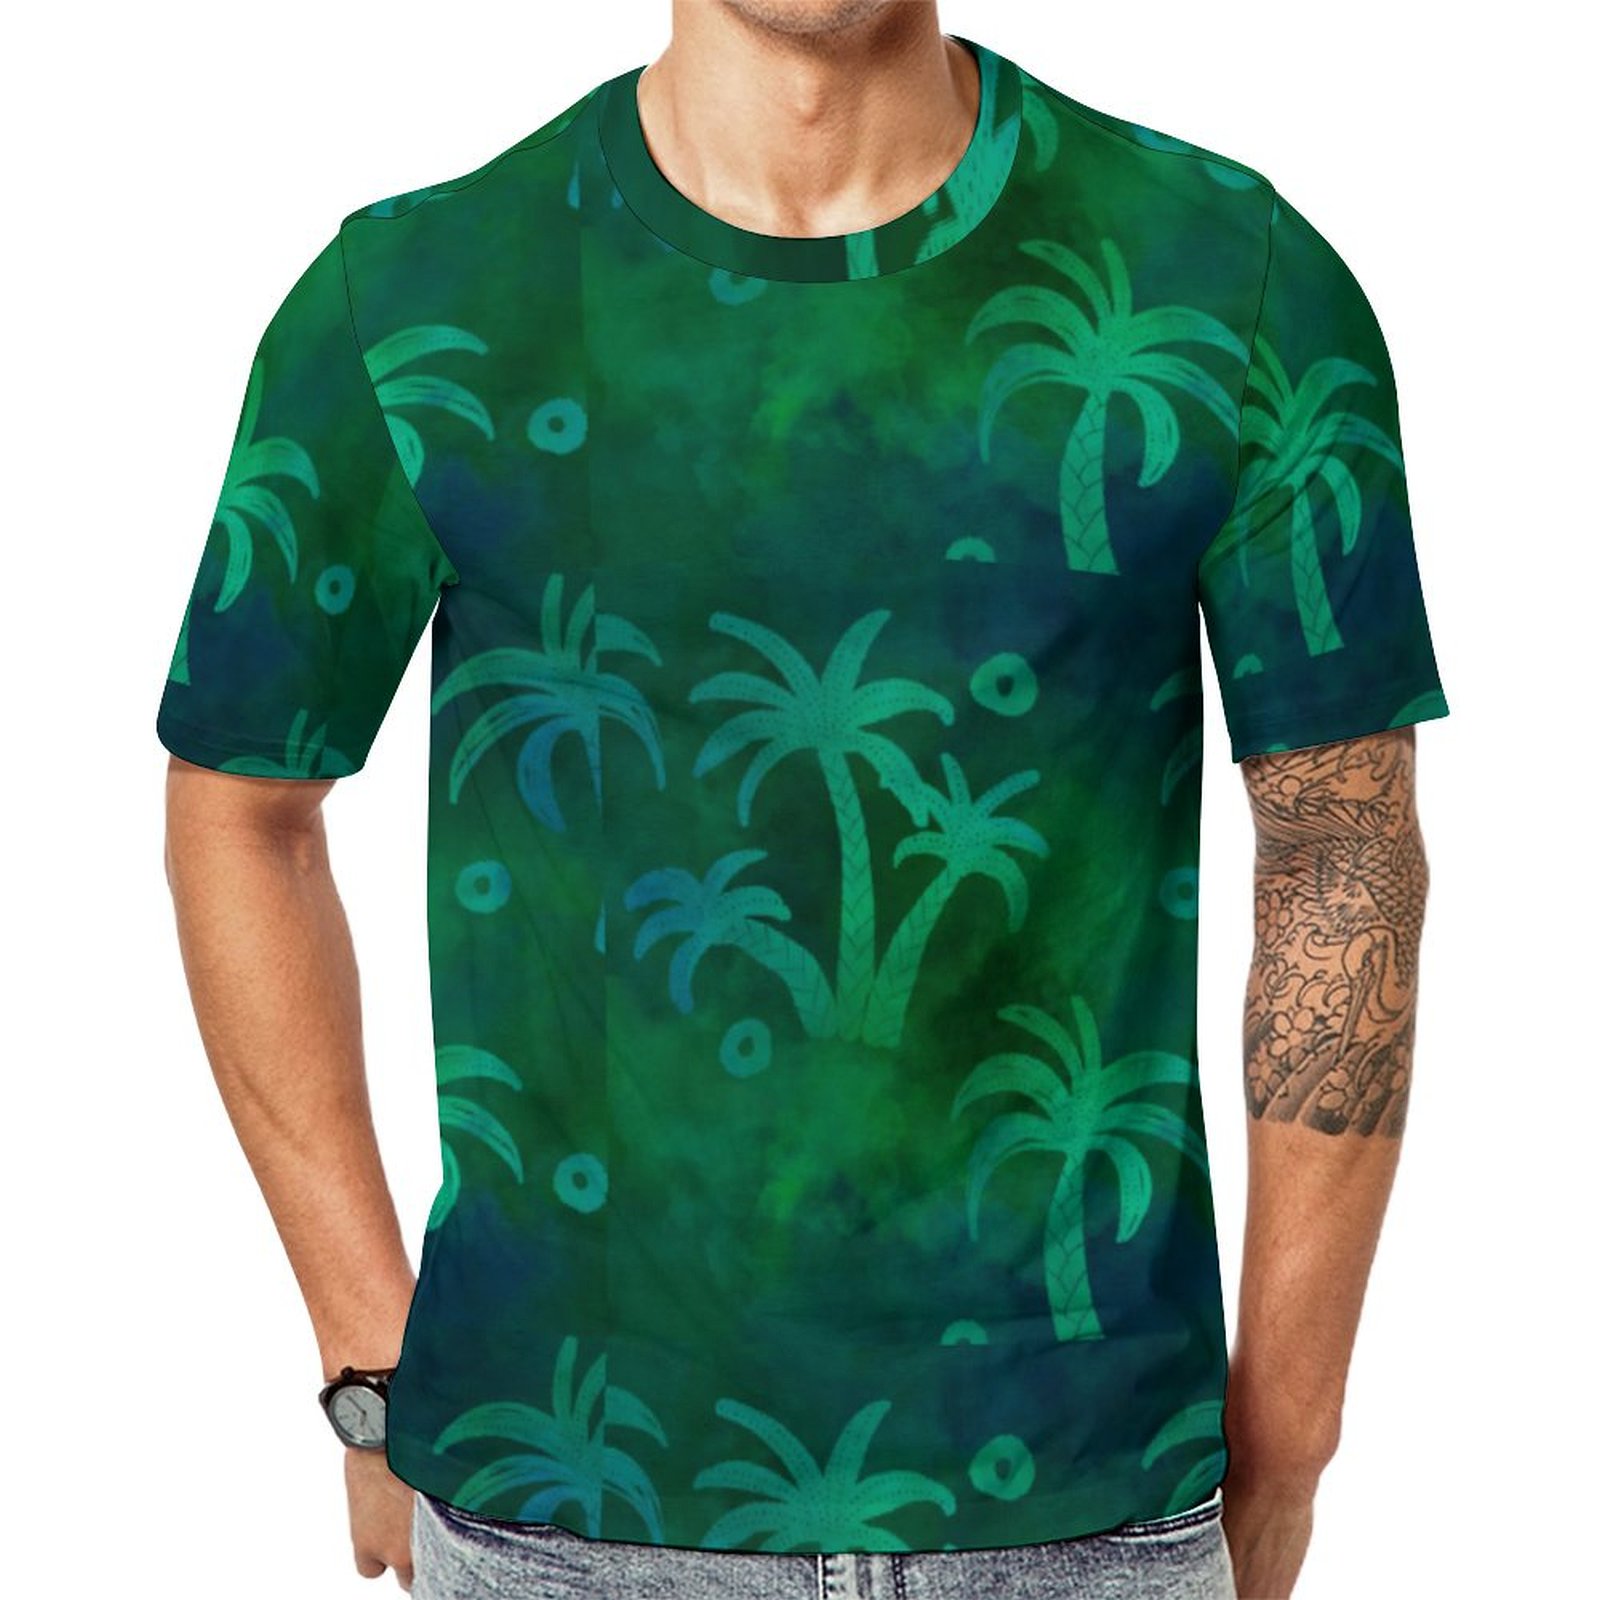 Green And Blue Palm Tree Short Sleeve Print Unisex Tshirt Summer Casual Tees for Men and Women Coolcoshirts